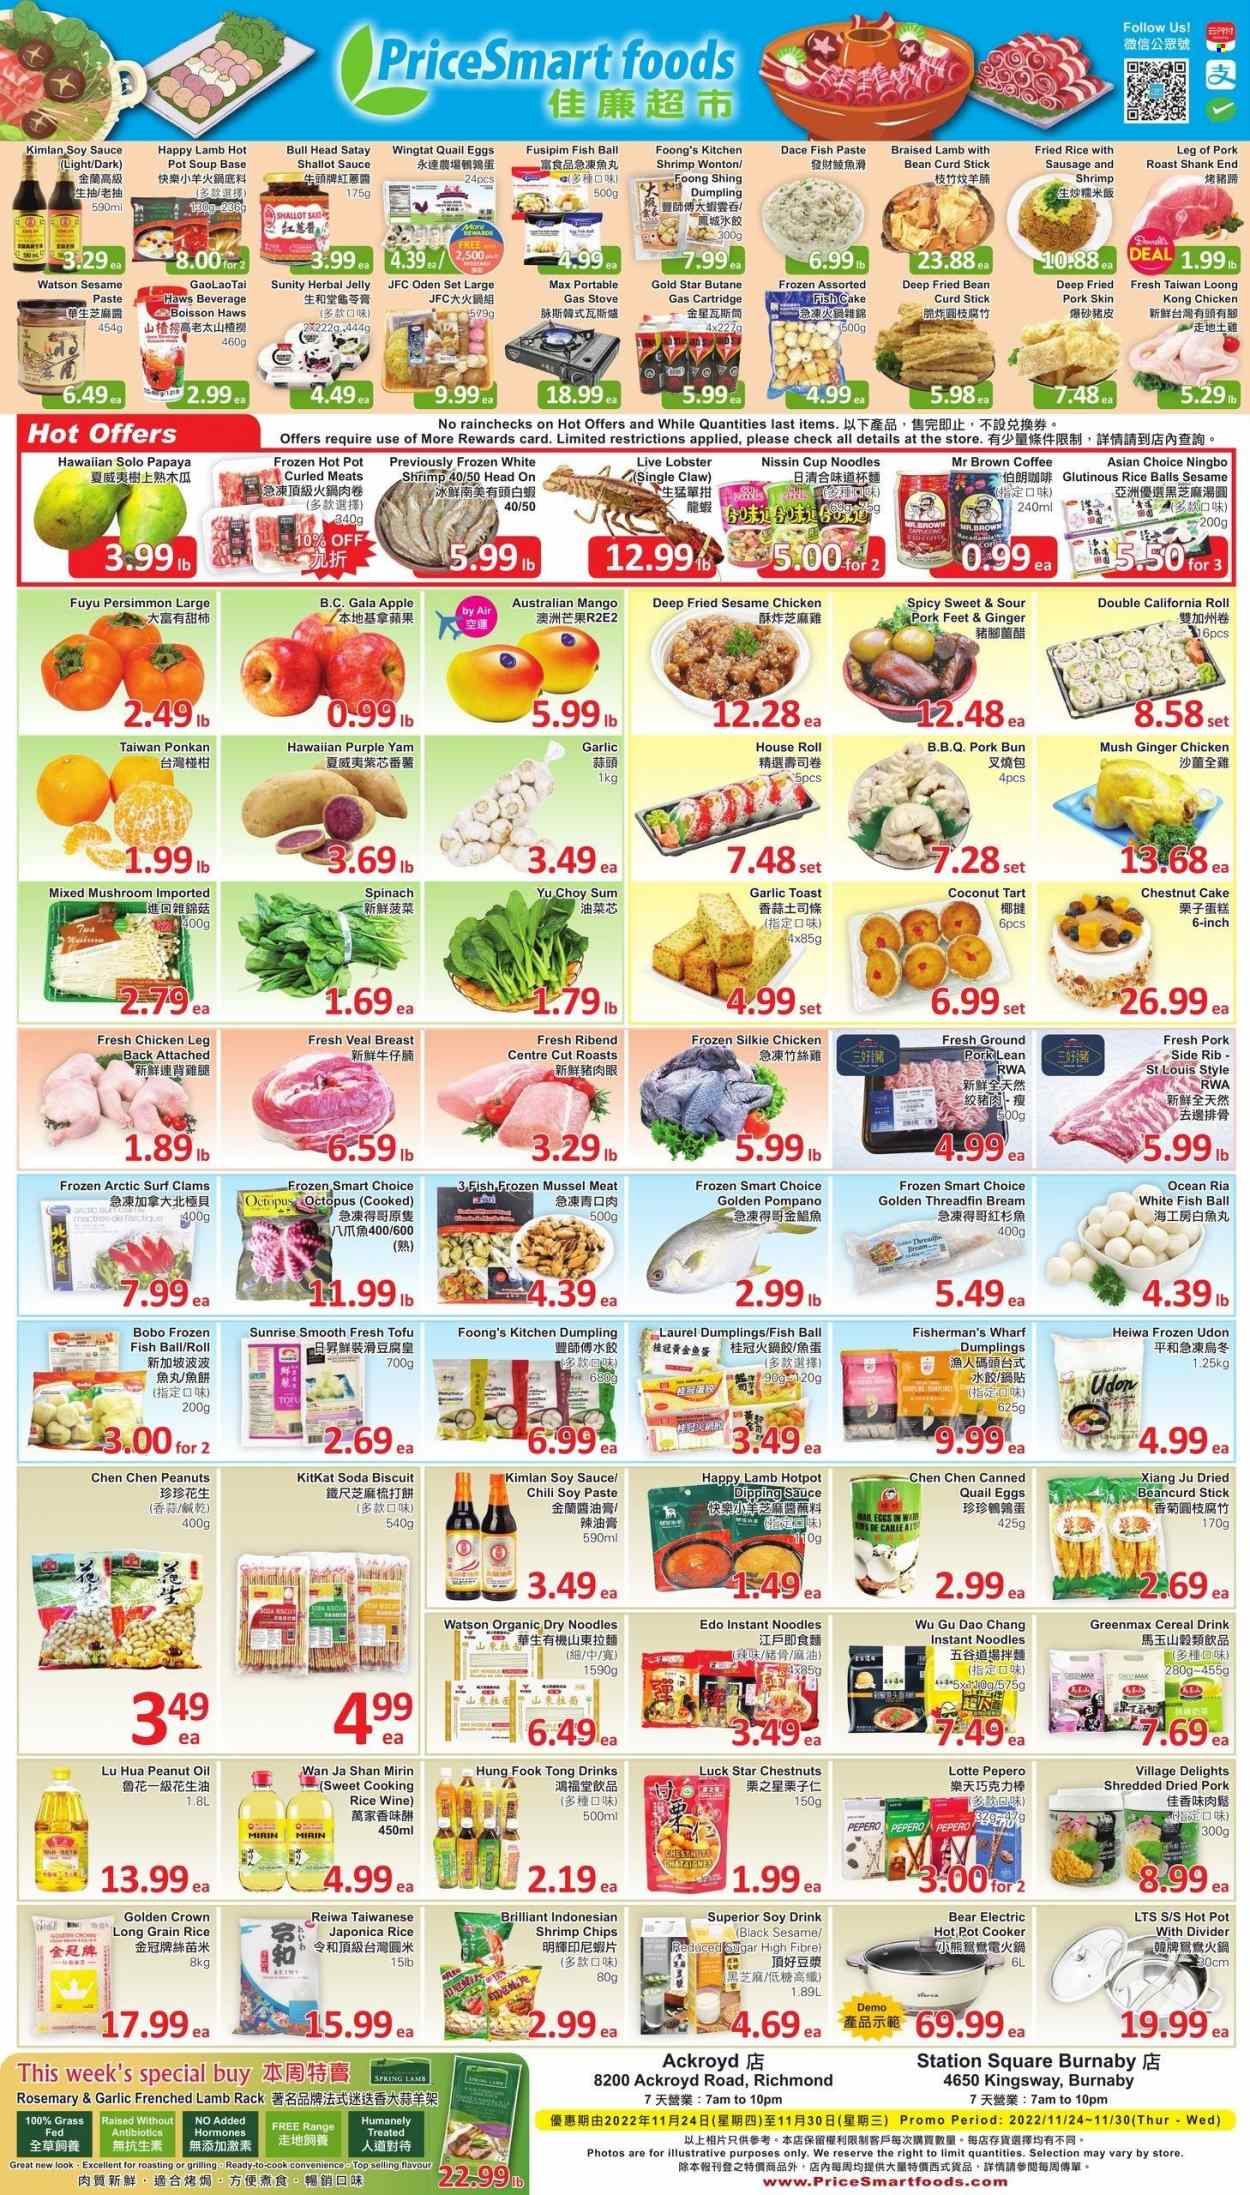 thumbnail - PriceSmart Foods Flyer - November 24, 2022 - November 30, 2022 - Sales products - mushrooms, cake, Gala, papaya, persimmons, coconut, ponkan, clams, mussels, whitefish, octopus, pompano, shrimps, soup, instant noodles, sauce, dumplings, noodles cup, noodles, Nissin, sausage, curd, tofu, eggs, rice balls, fish cake, KitKat, jelly, biscuit, cereals, long grain rice, rosemary, soy sauce, mirin, peanut oil, oil, chestnuts, peanuts, soda, coffee, rice wine, quail, chicken legs, ground pork, pork meat, pork roast, Scott, Surf, pot. Page 1.